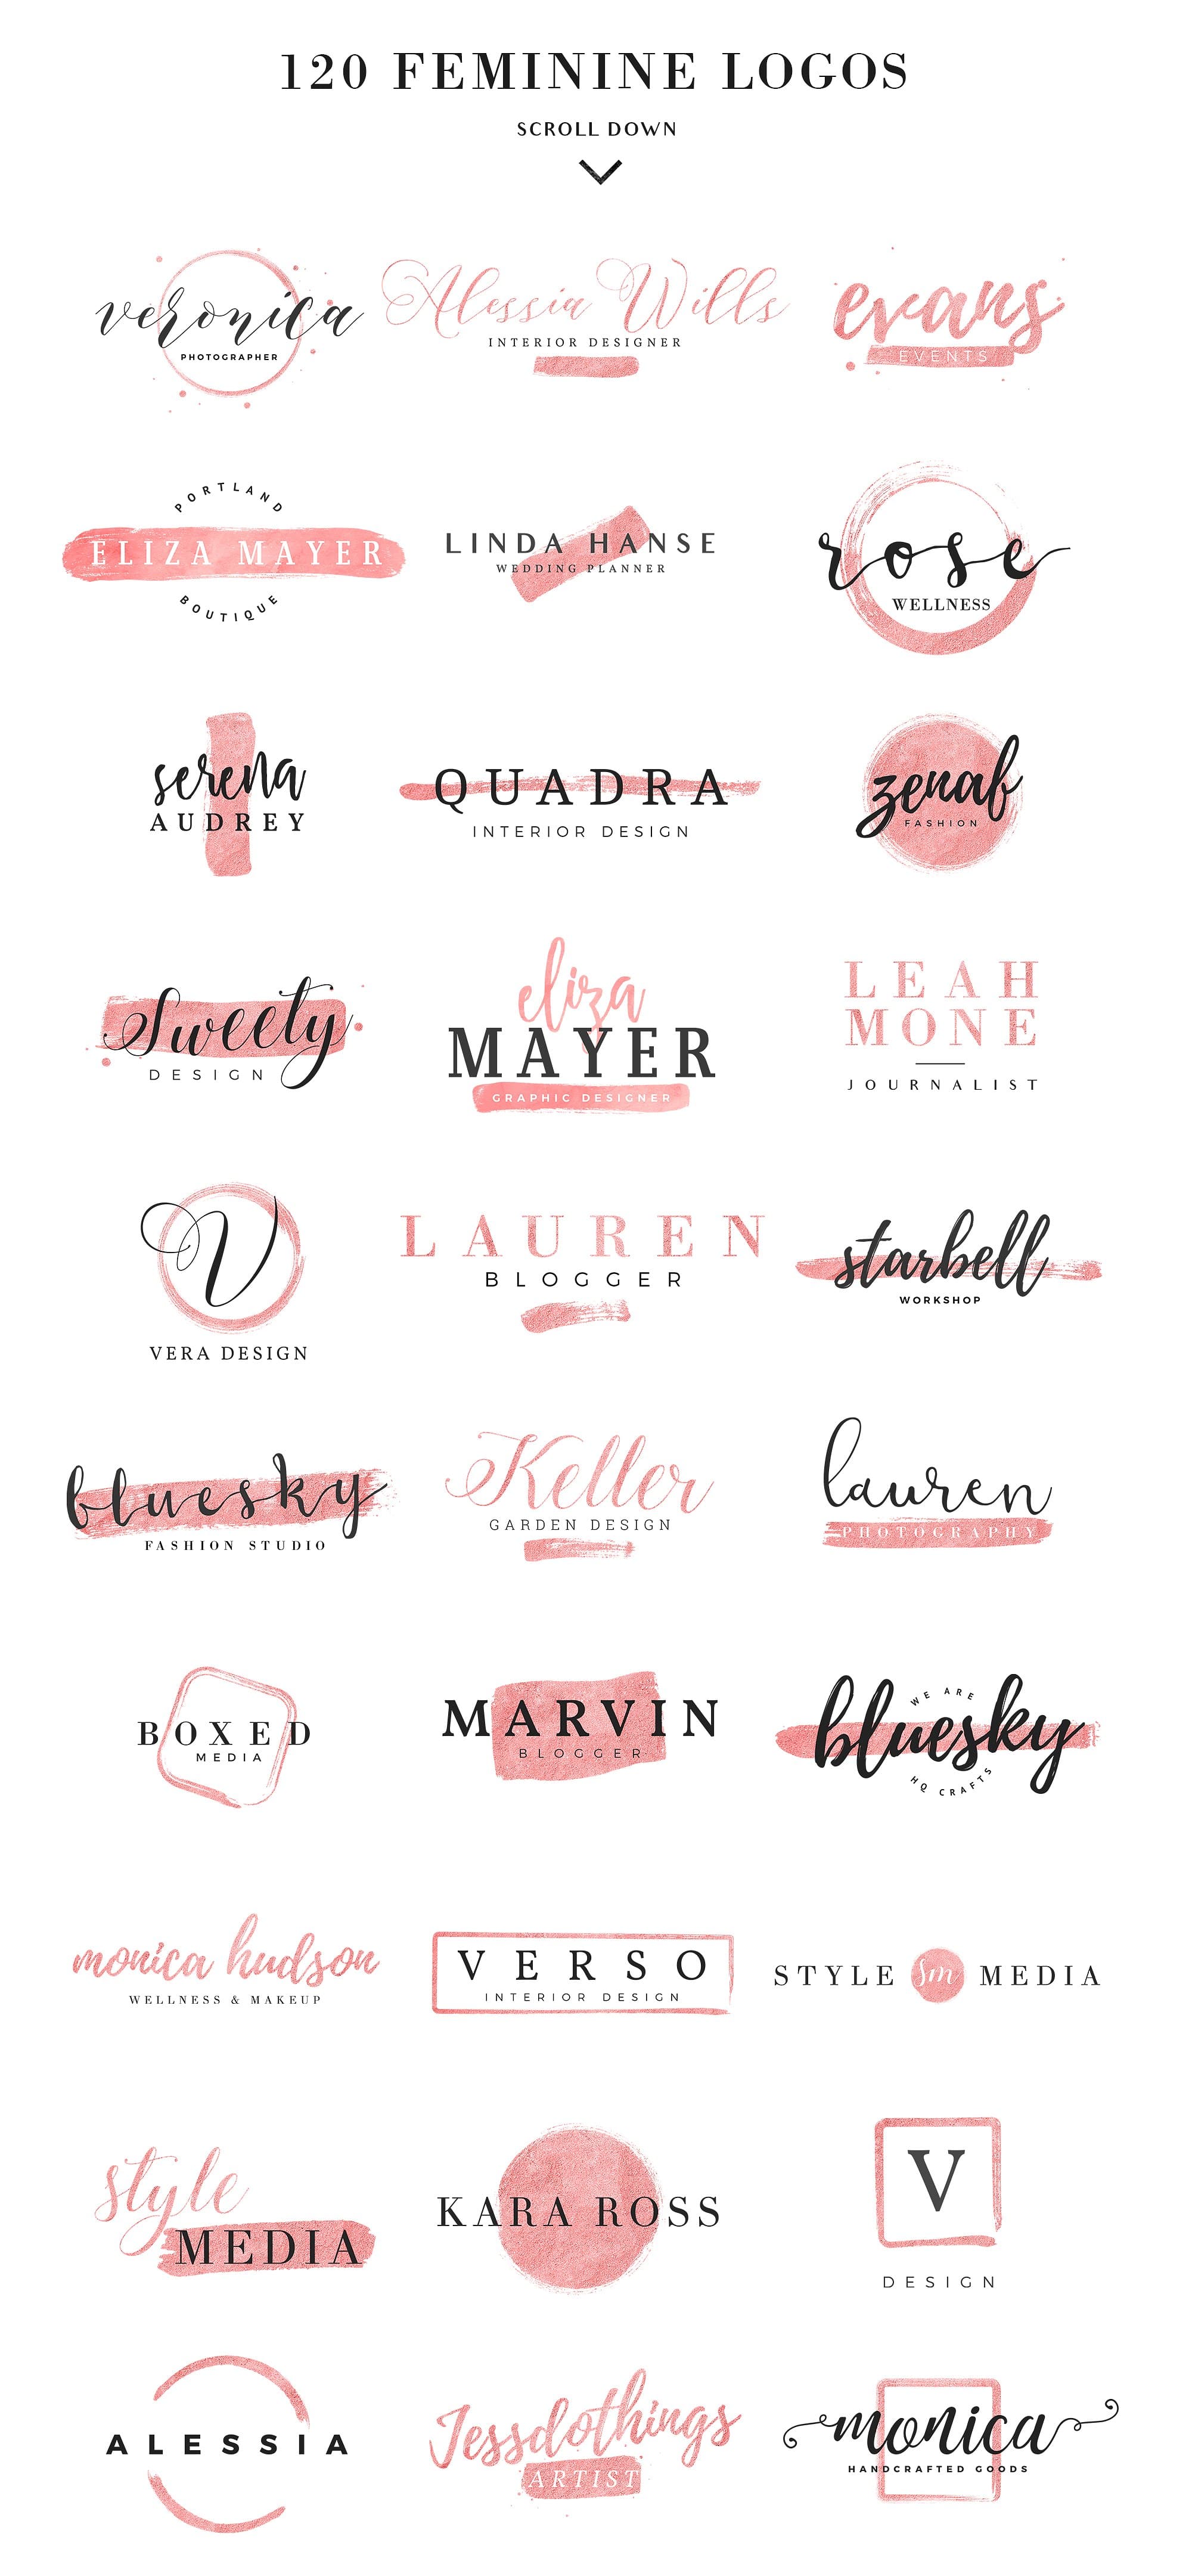 Feminine Branding Logos by David Bassu is a beautiful collection of premium blog style feminine logo templates. Includes 120 feminine modern logos you can customize using Photoshop & Illustrator. Bonus: 25 high quality textures that will really spice up your logo design. Shop online at Jennifer-Franklin.com/shop.